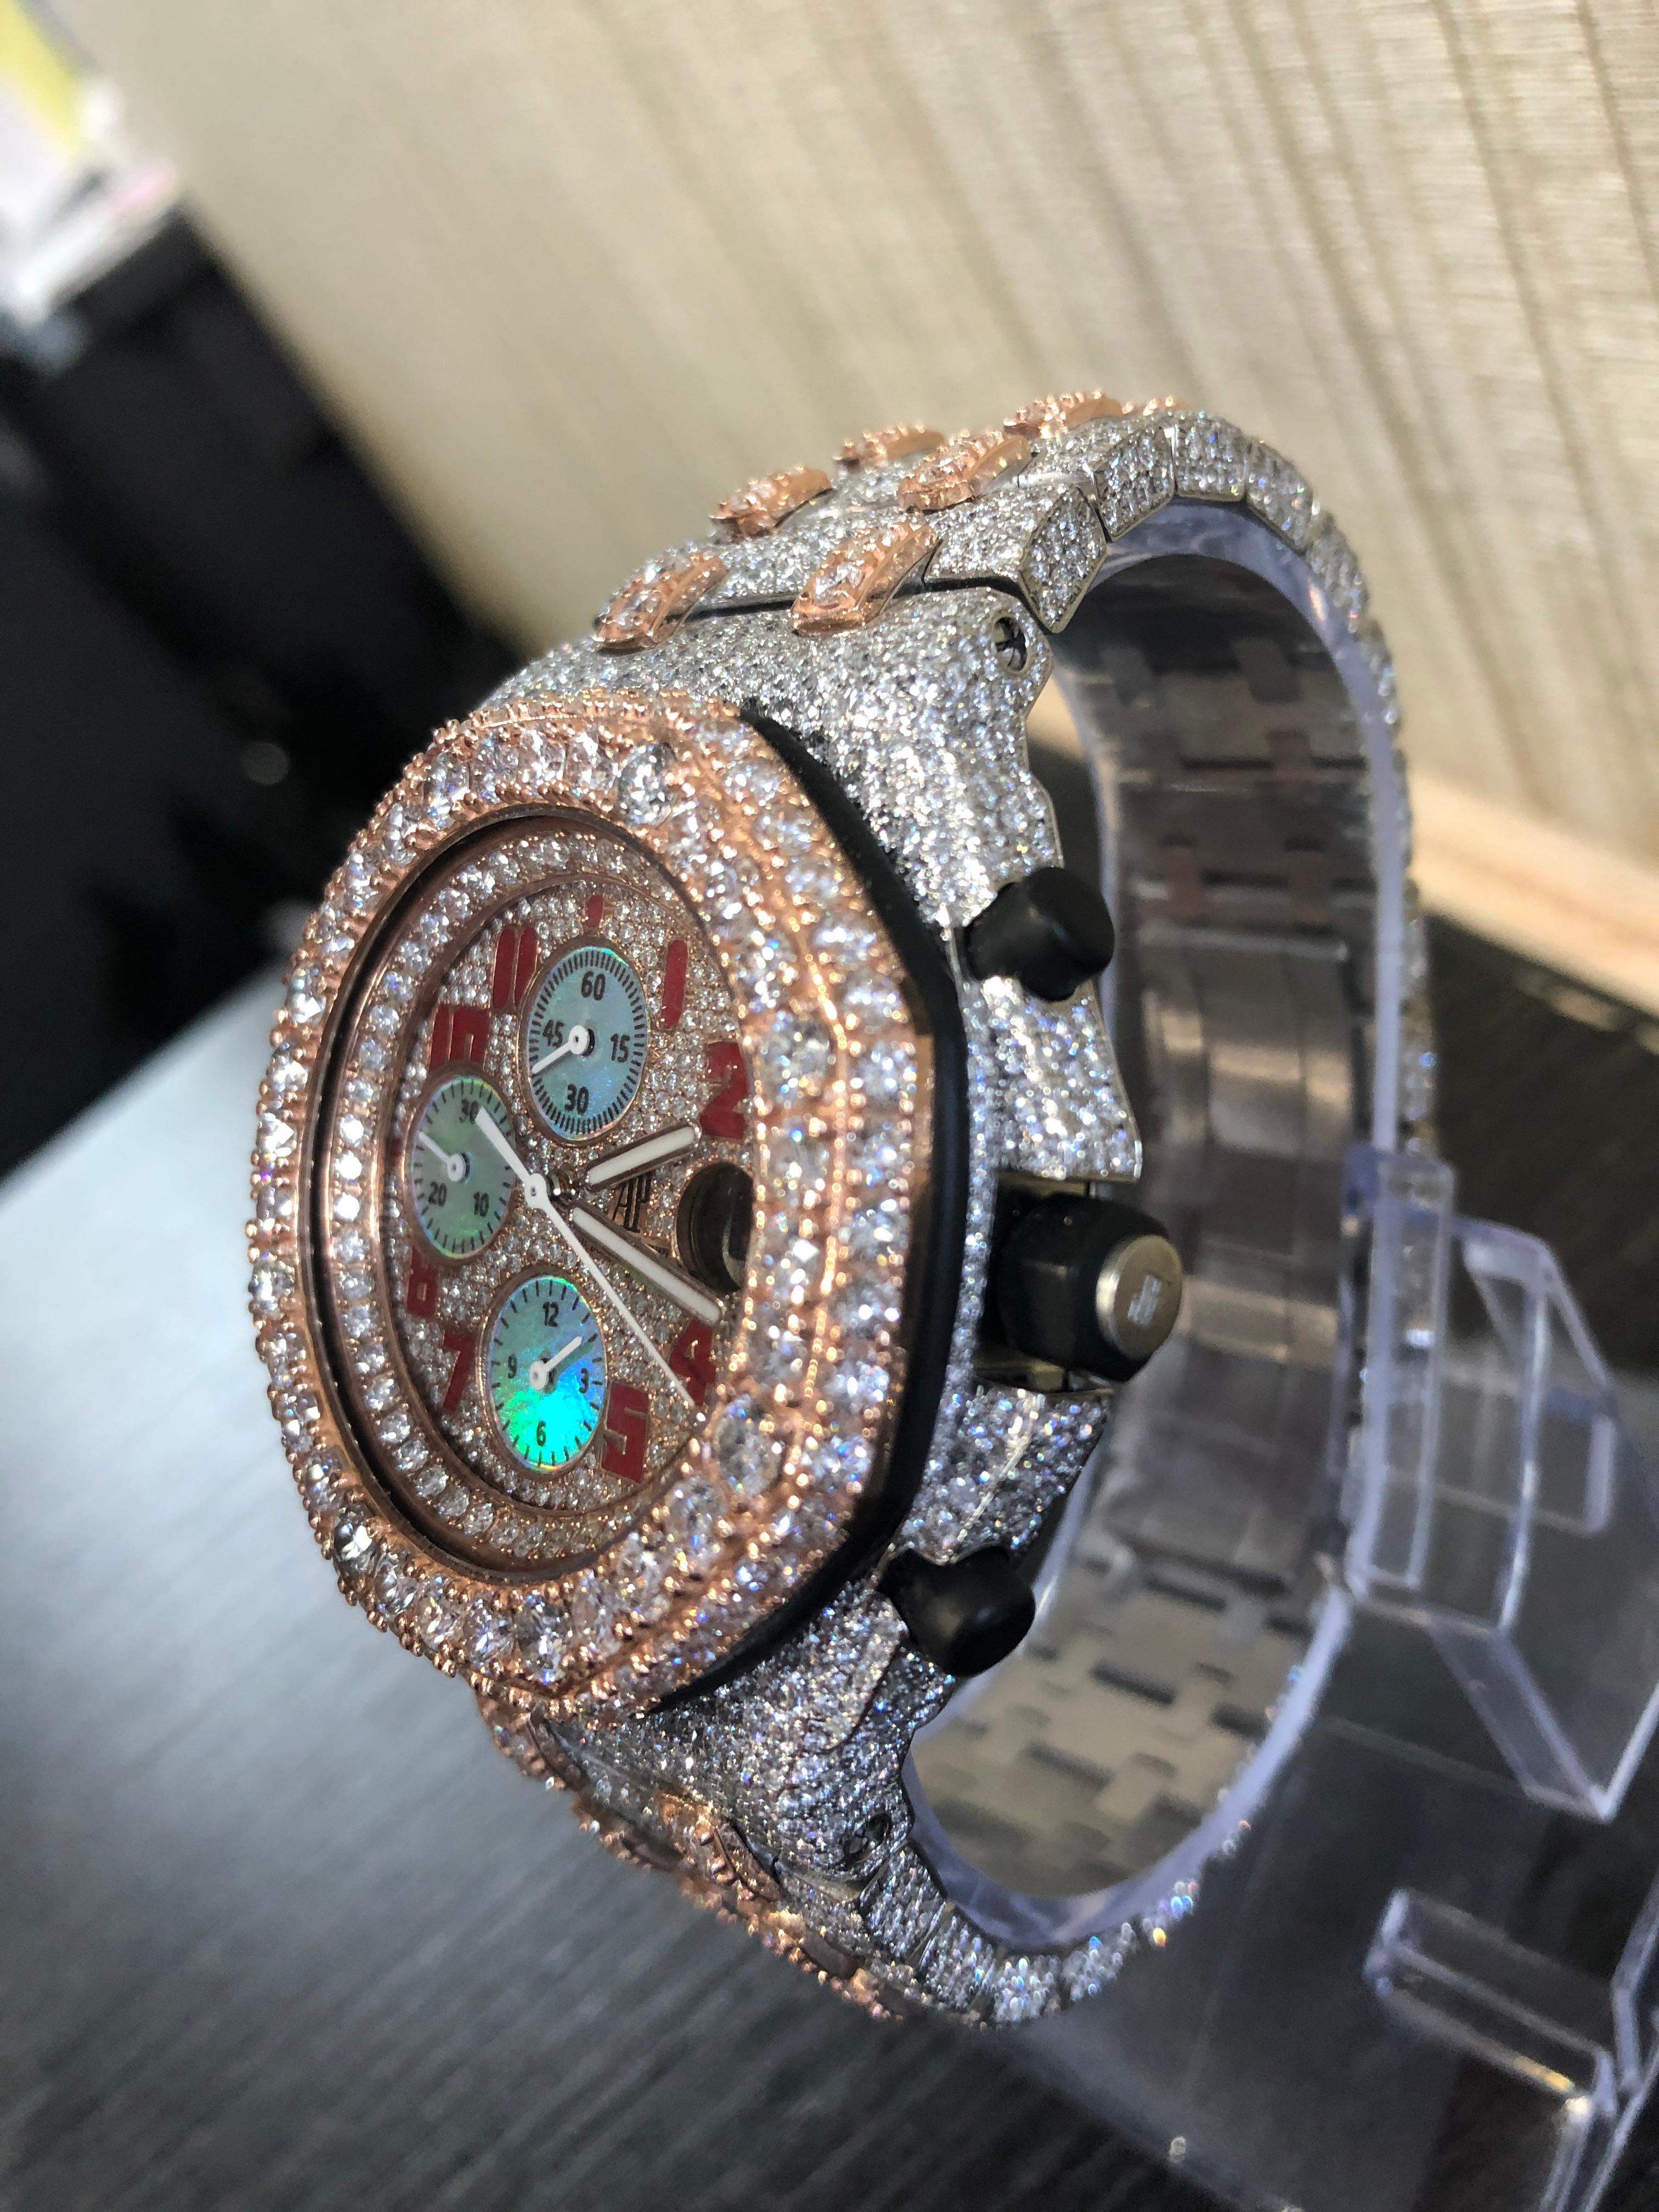 Audemars Piguet Offshore 18K Gold and Stainless Steel  Iced Out 45 Carats Diamonds

multi color Diamond Dial

excellent condition
 collection diamonds 42 carats

This watch is all original Audemars Piguet

this watch was customized by replacing the